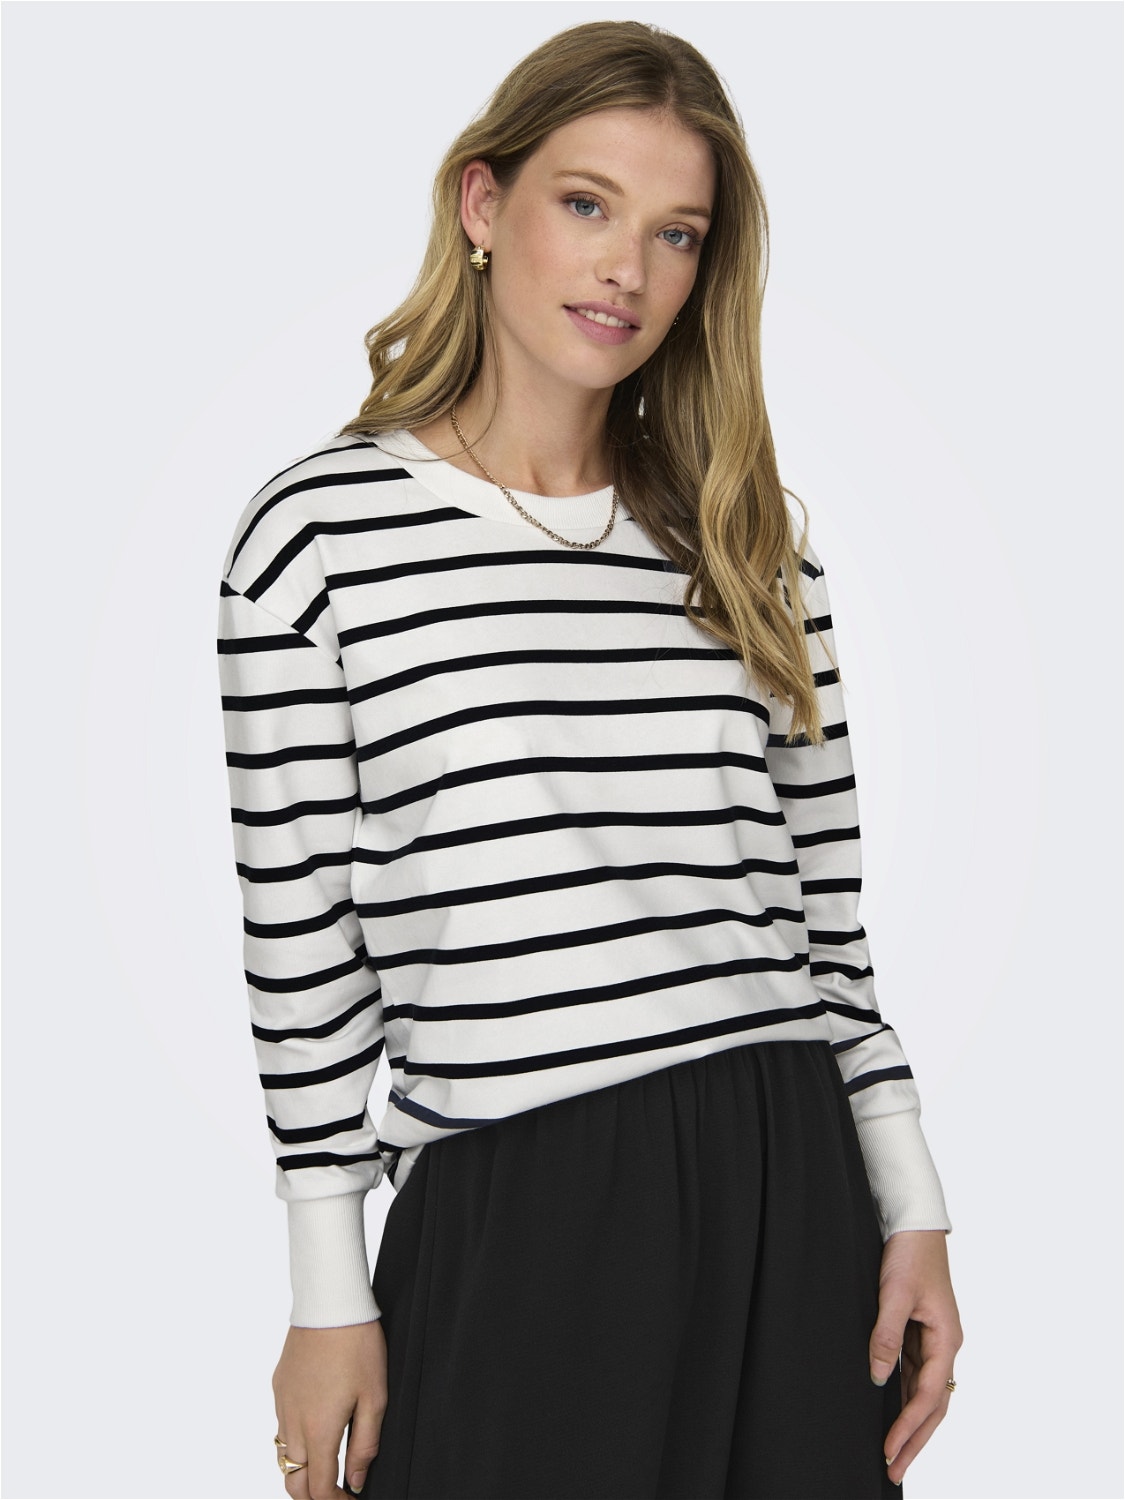 ONLY Striped top -Cloud Dancer - 15317470